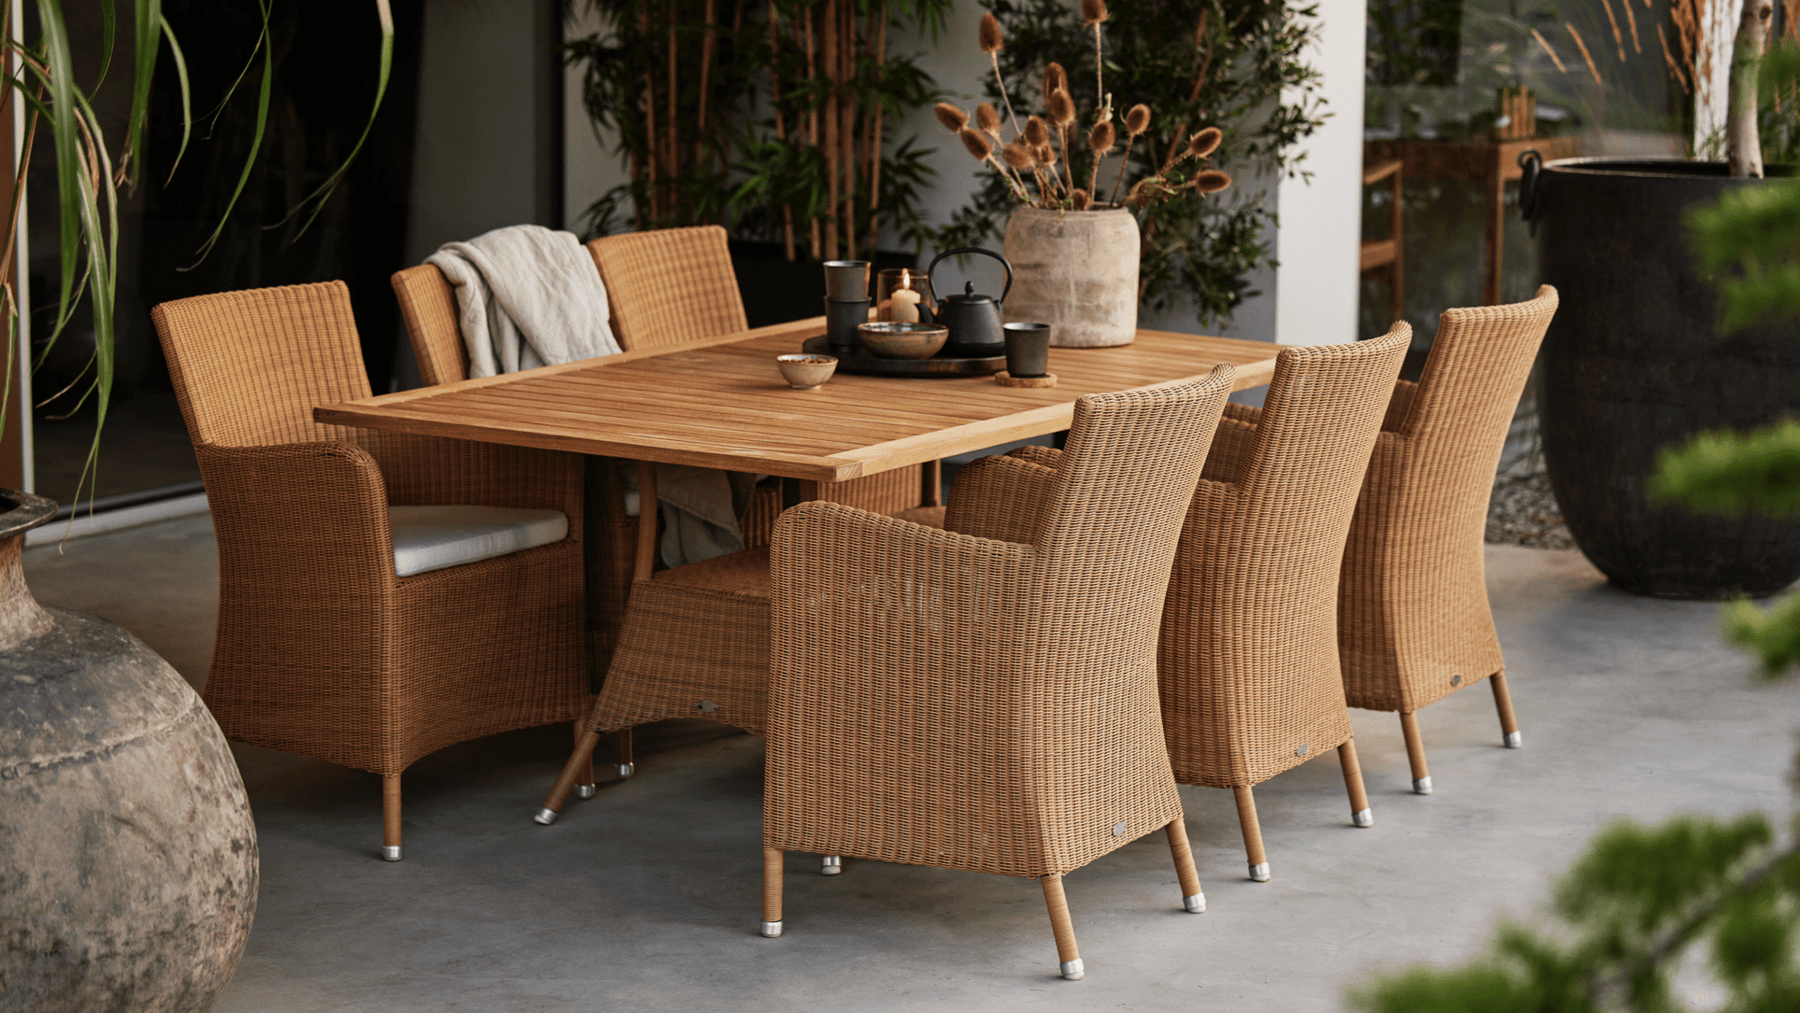 Danish loom-weave style outdoor dining chairs around teak table.